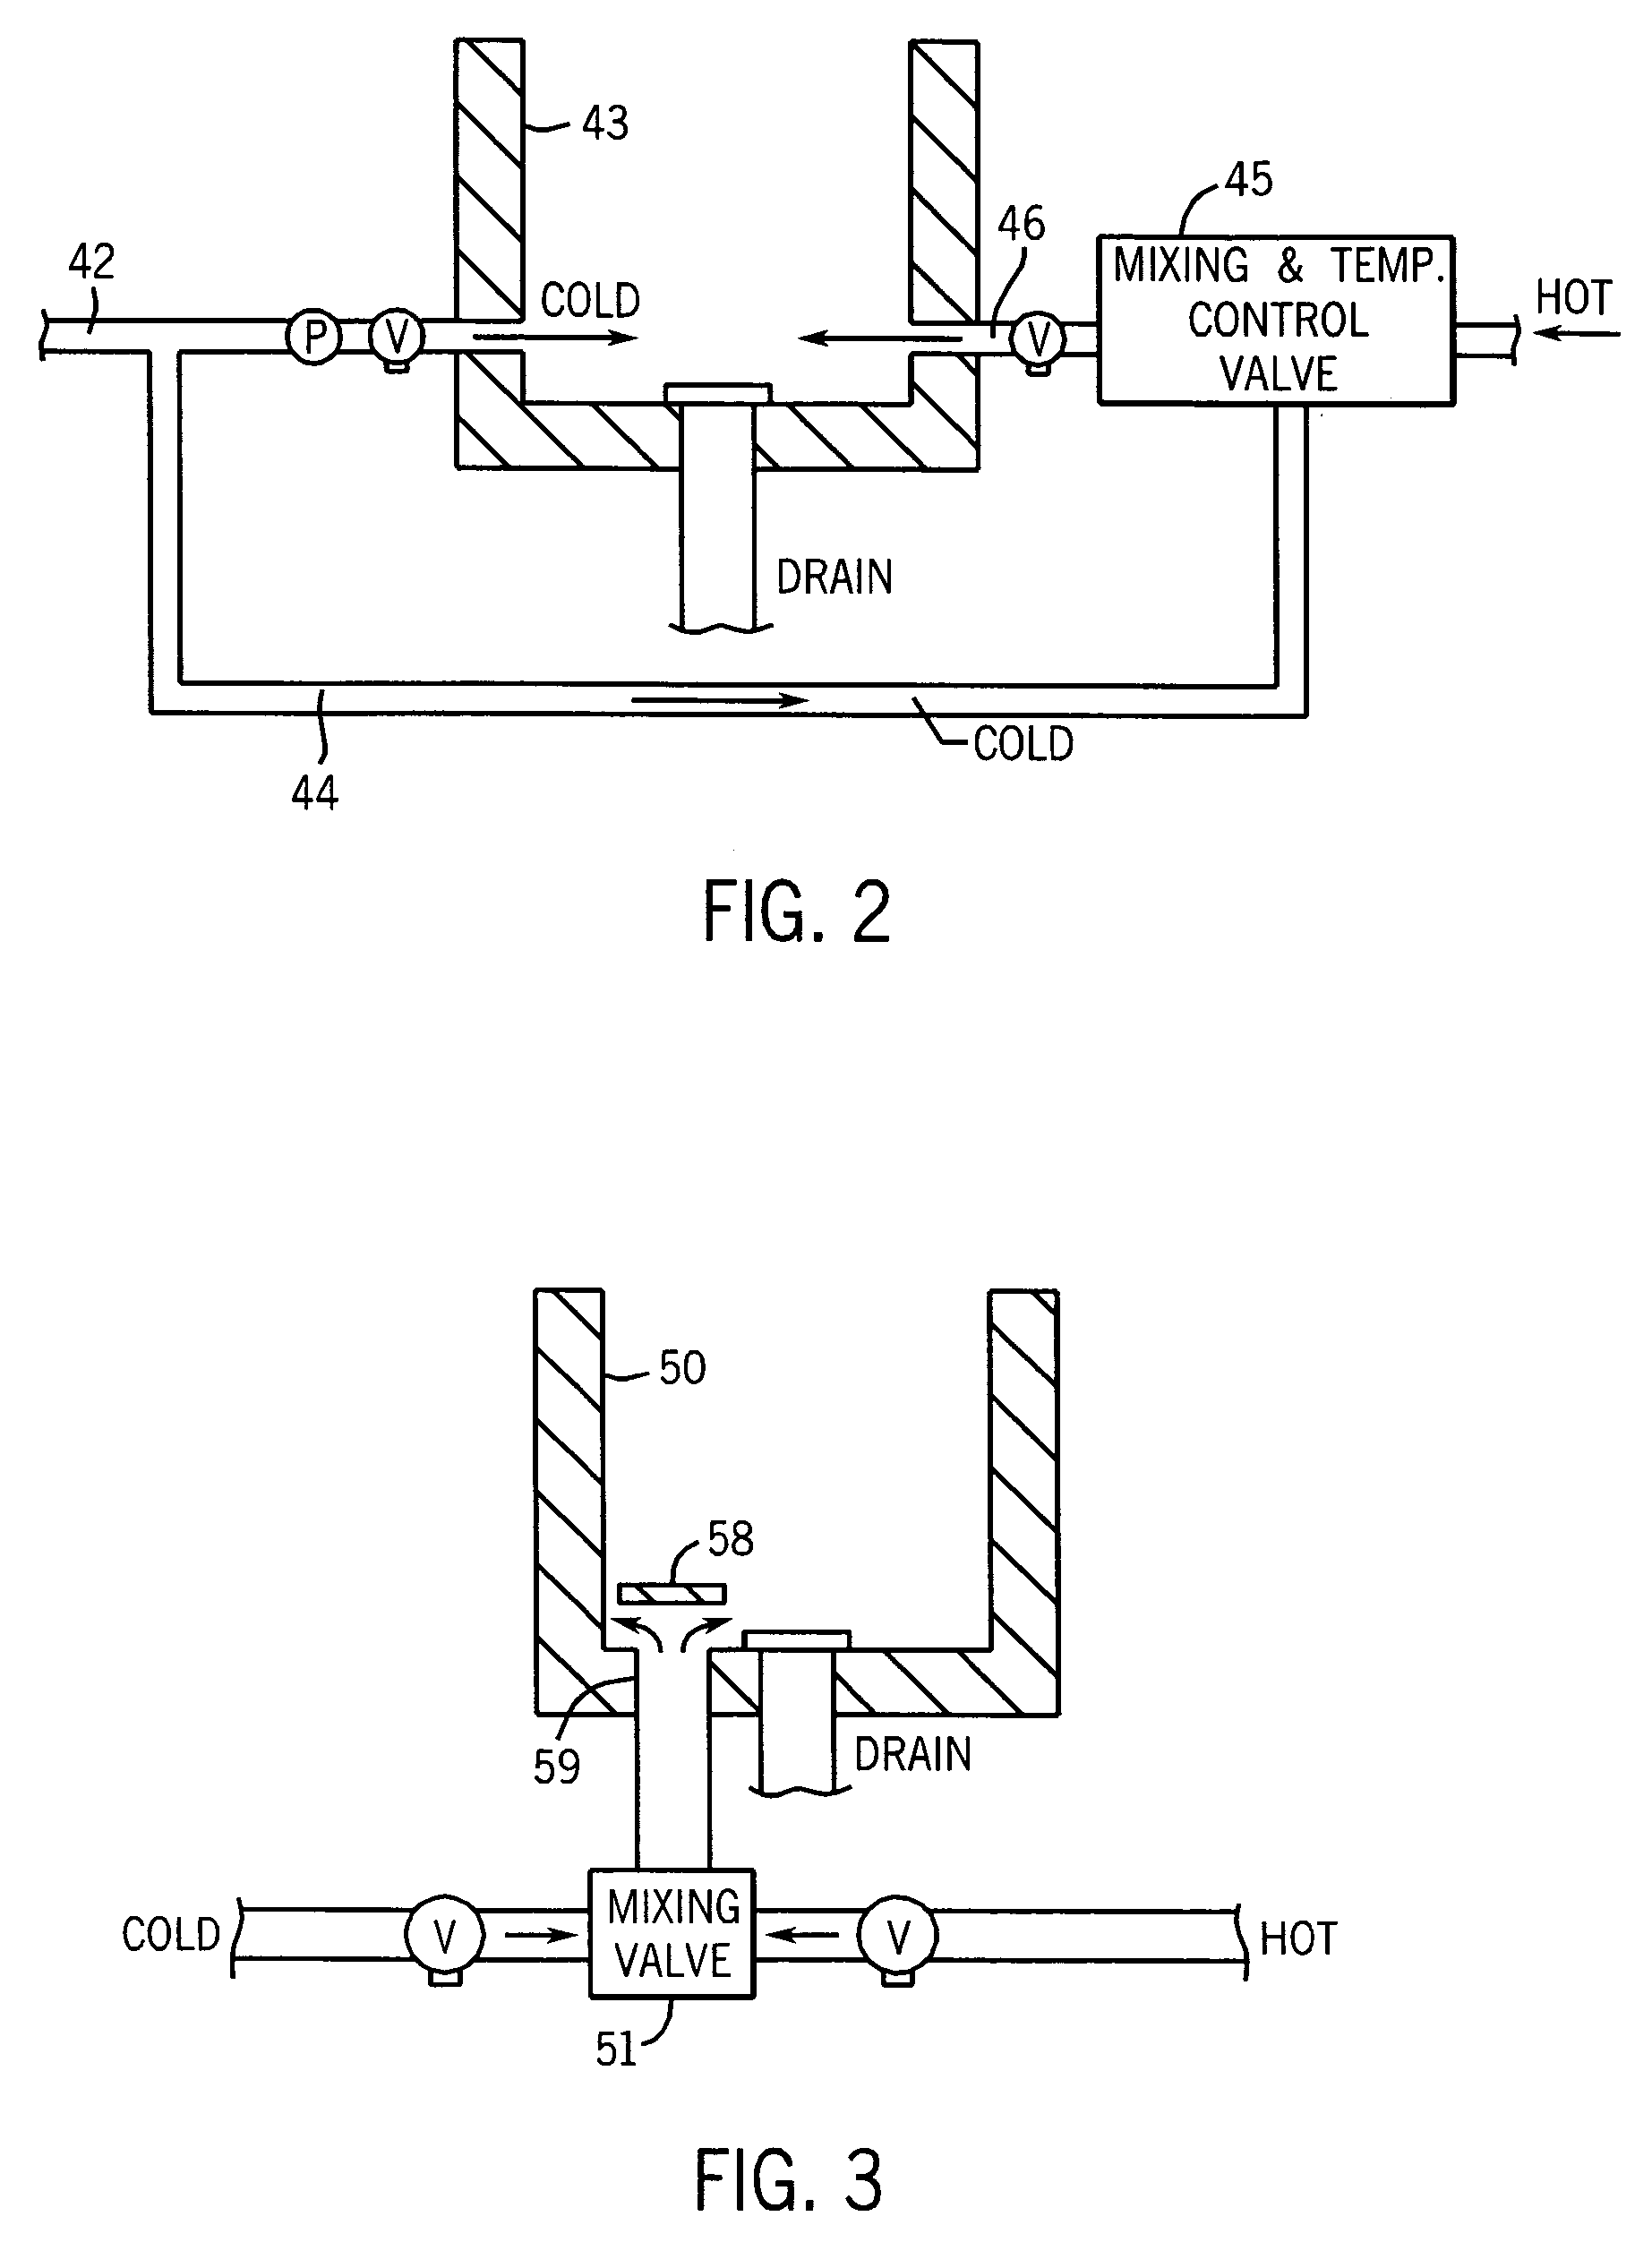 High flow rate water supply assembly